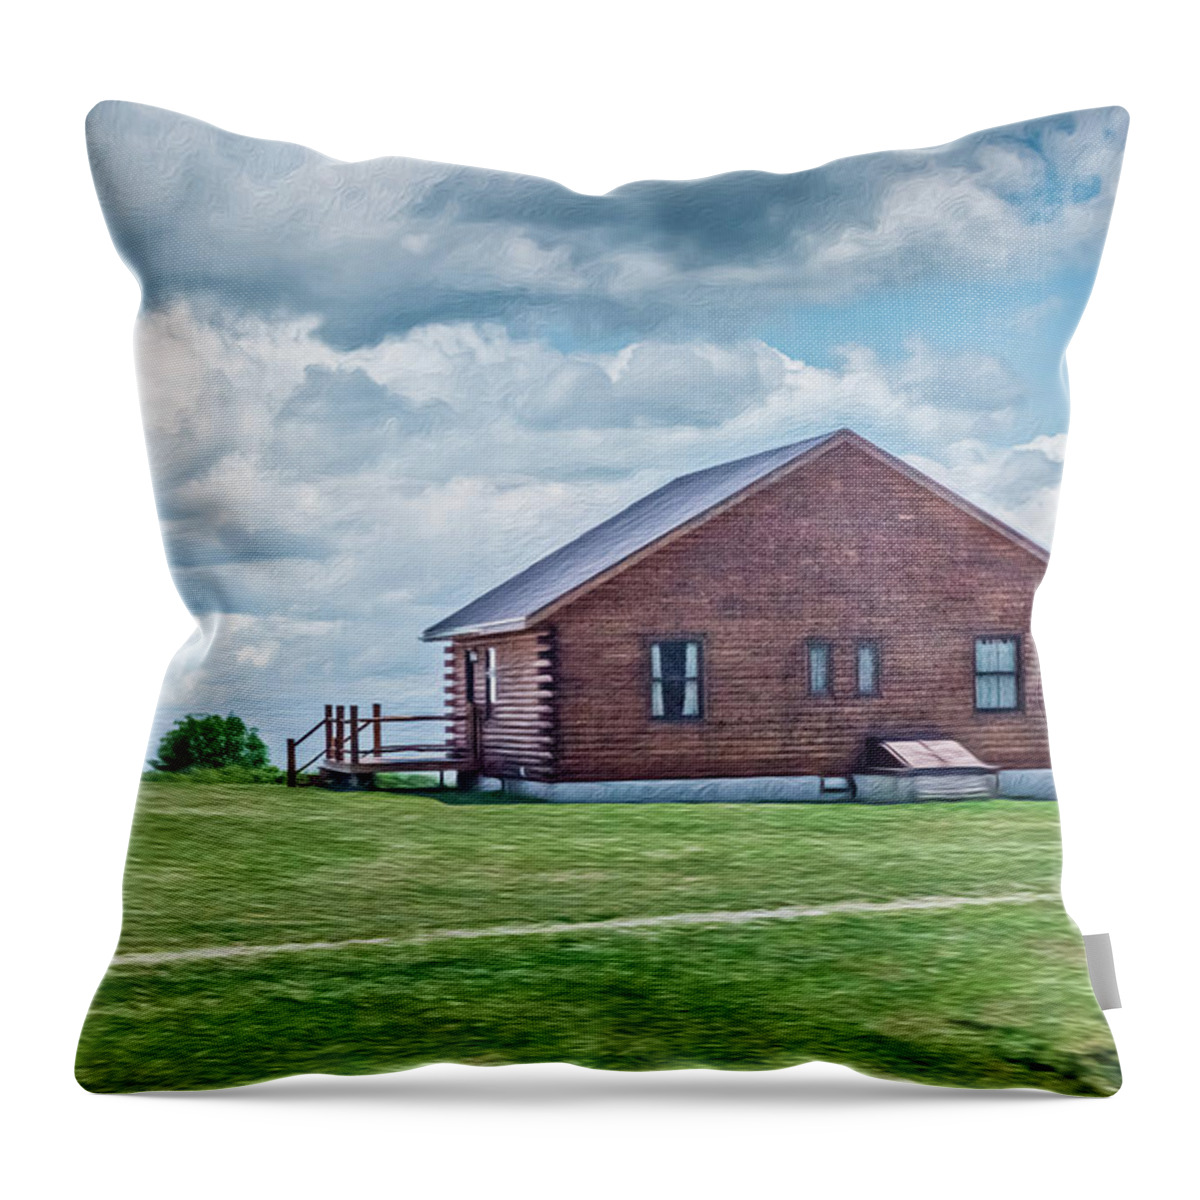 Refuge Throw Pillow featuring the photograph Refuge At The Edge of The World by Elvira Pinkhas